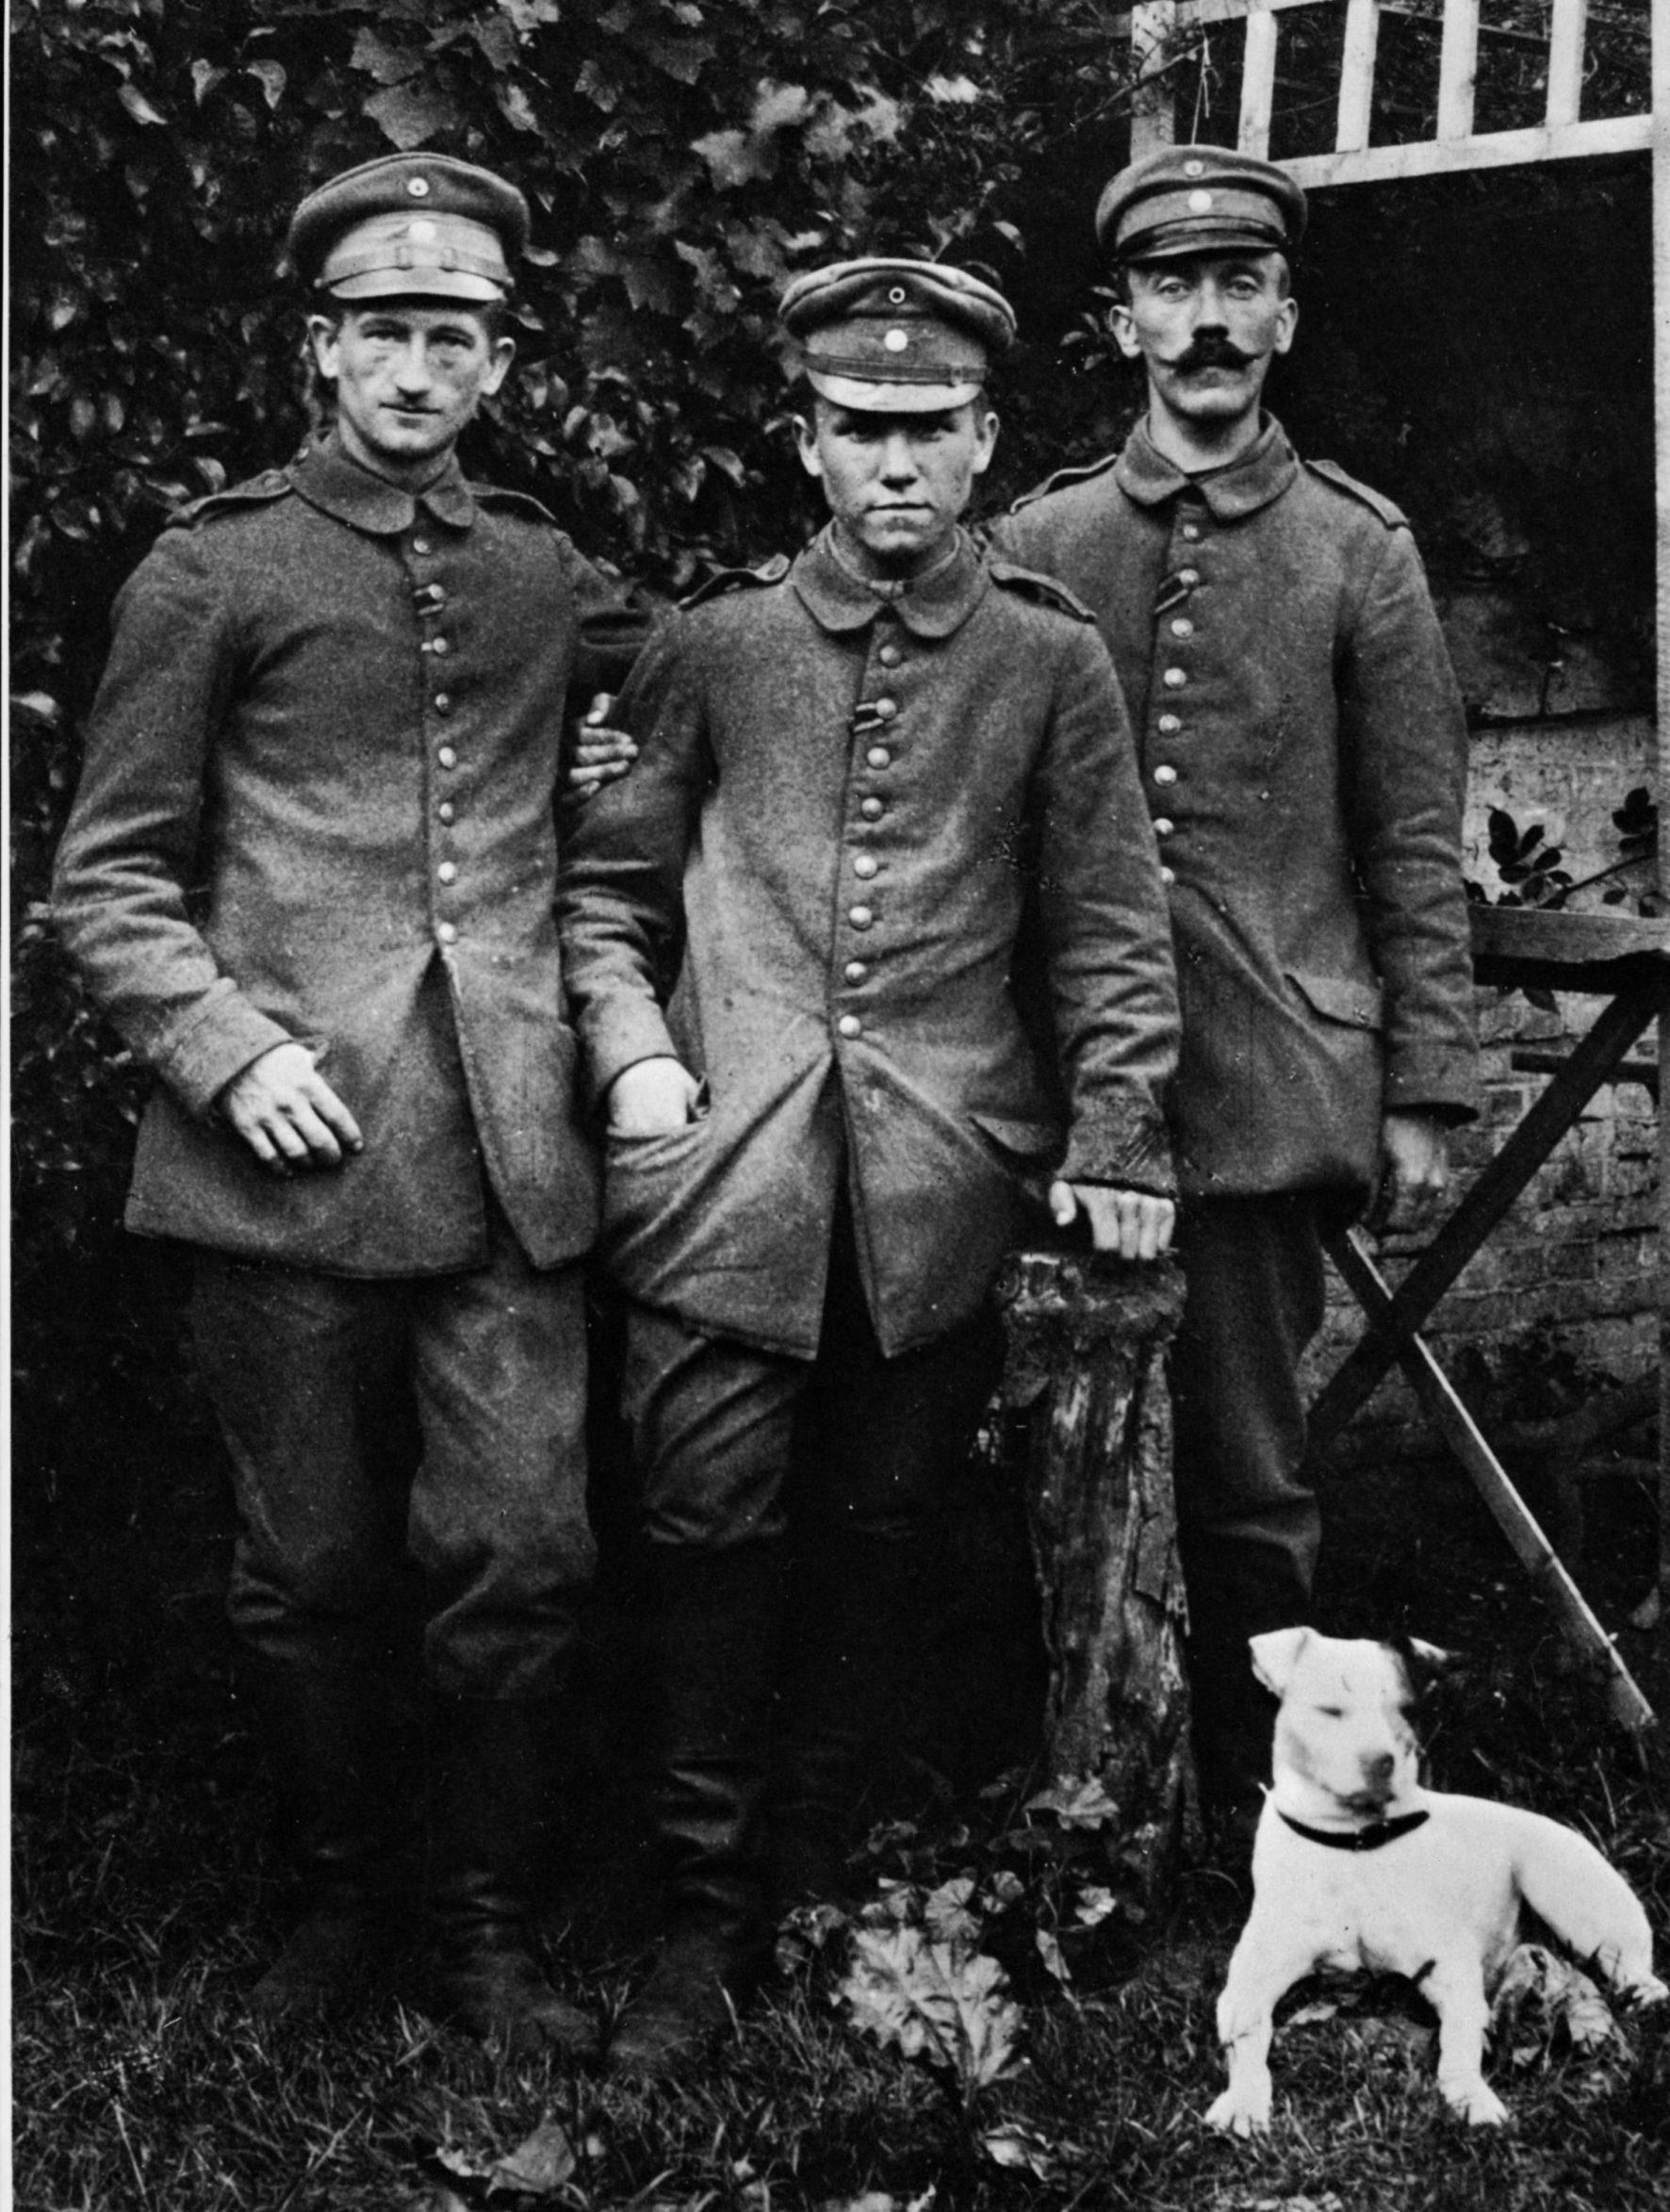 Hitler, on the right, during his military service some time between 1916 - 1919